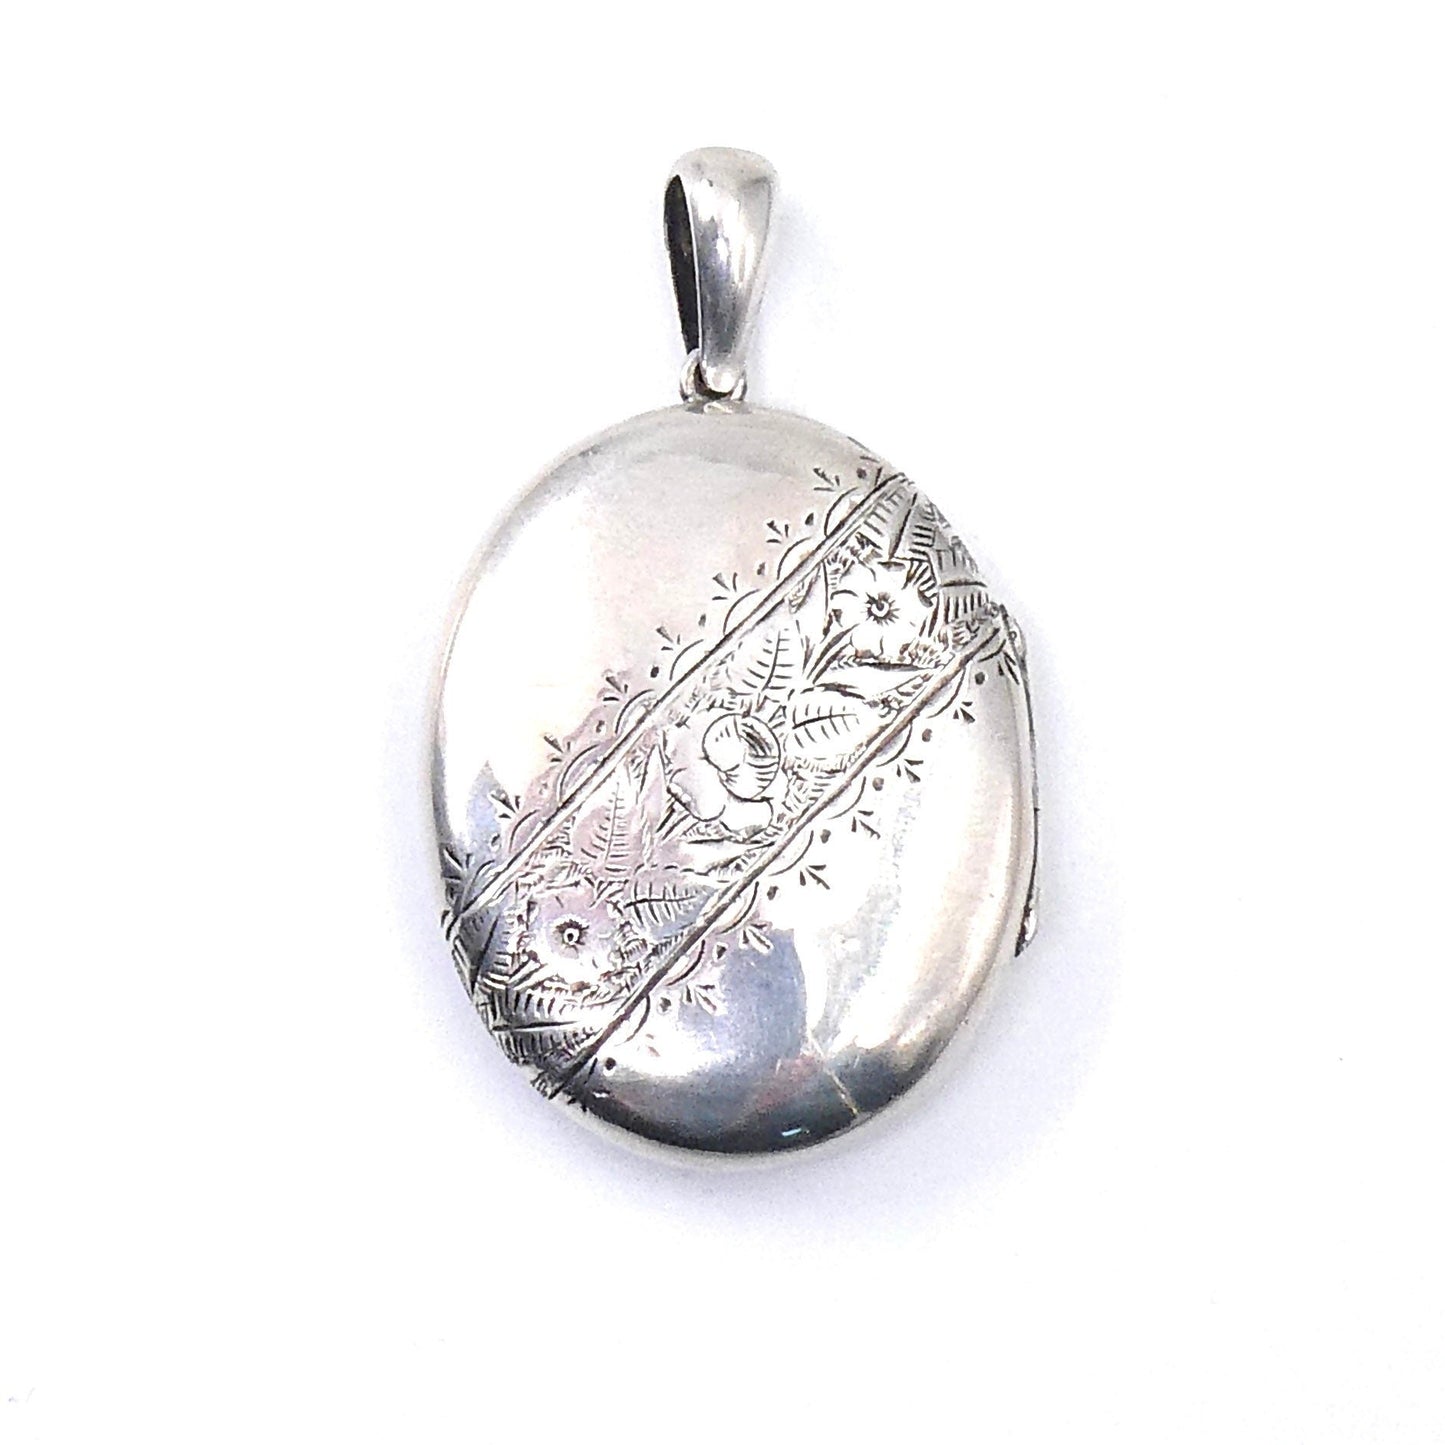 Engraved vintage locket, large oval silver locket with floral and leaf engraving diagonally across the locket. - Collected